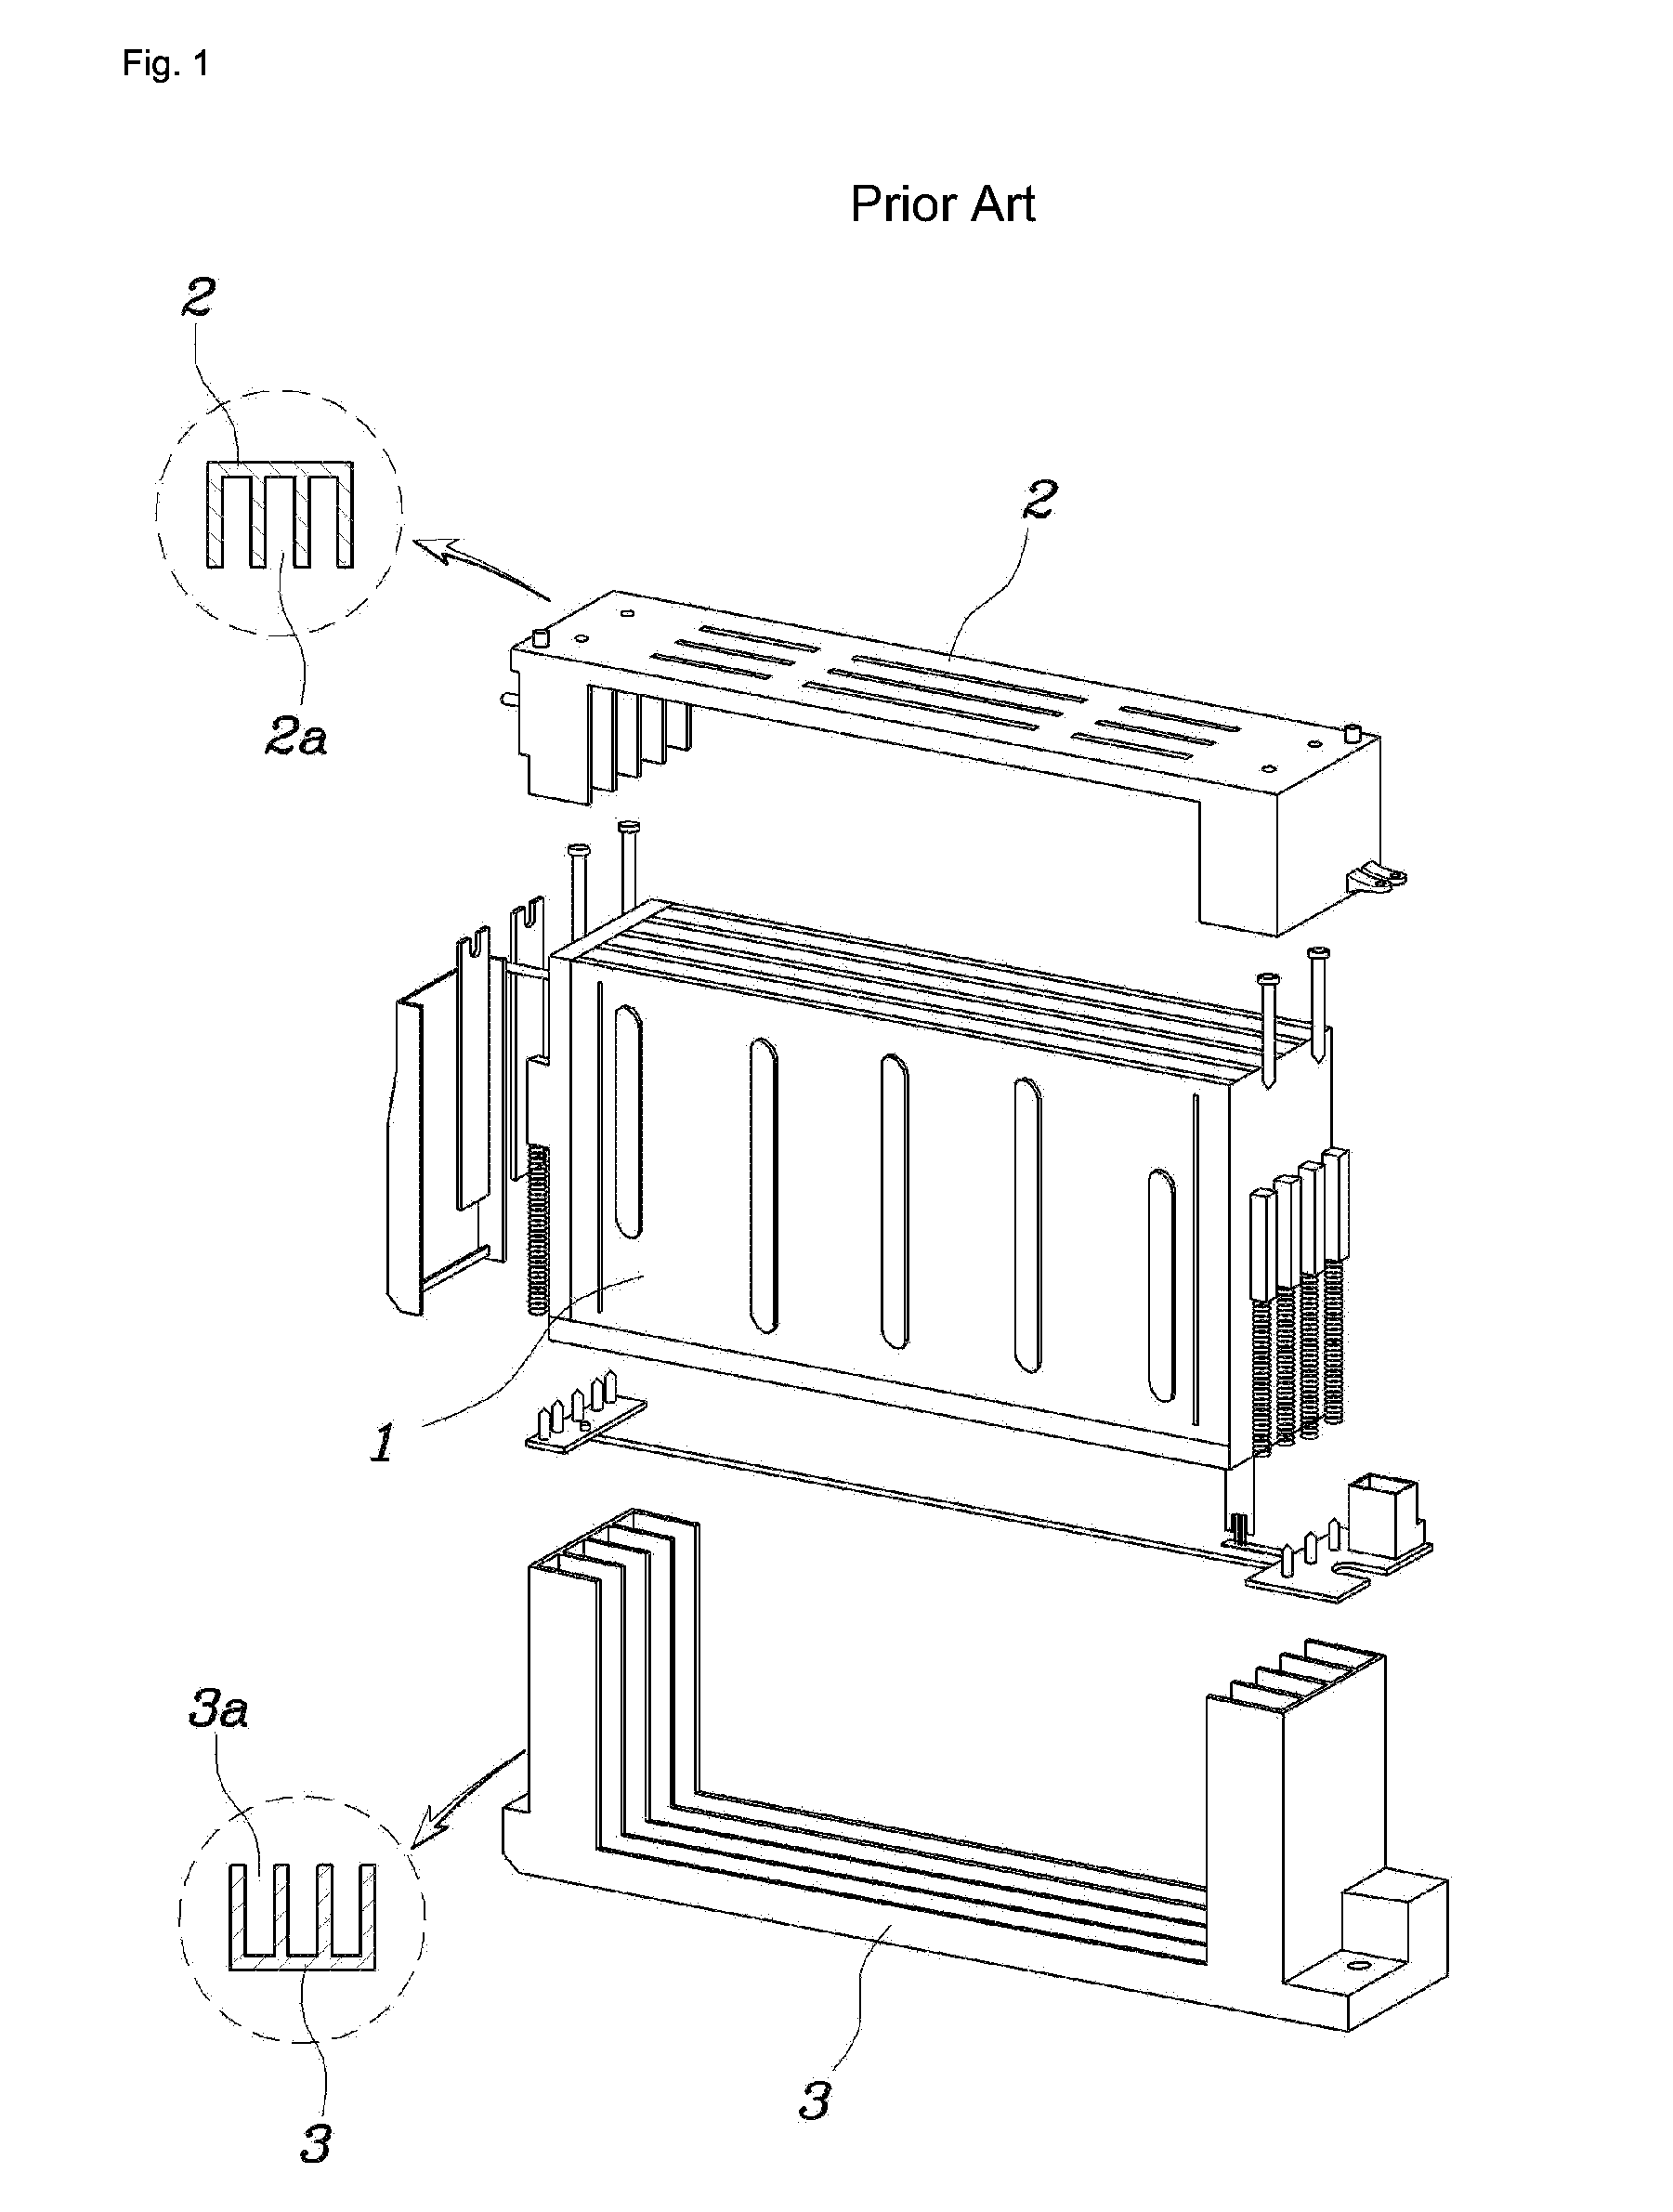 Battery module for high voltage battery pack